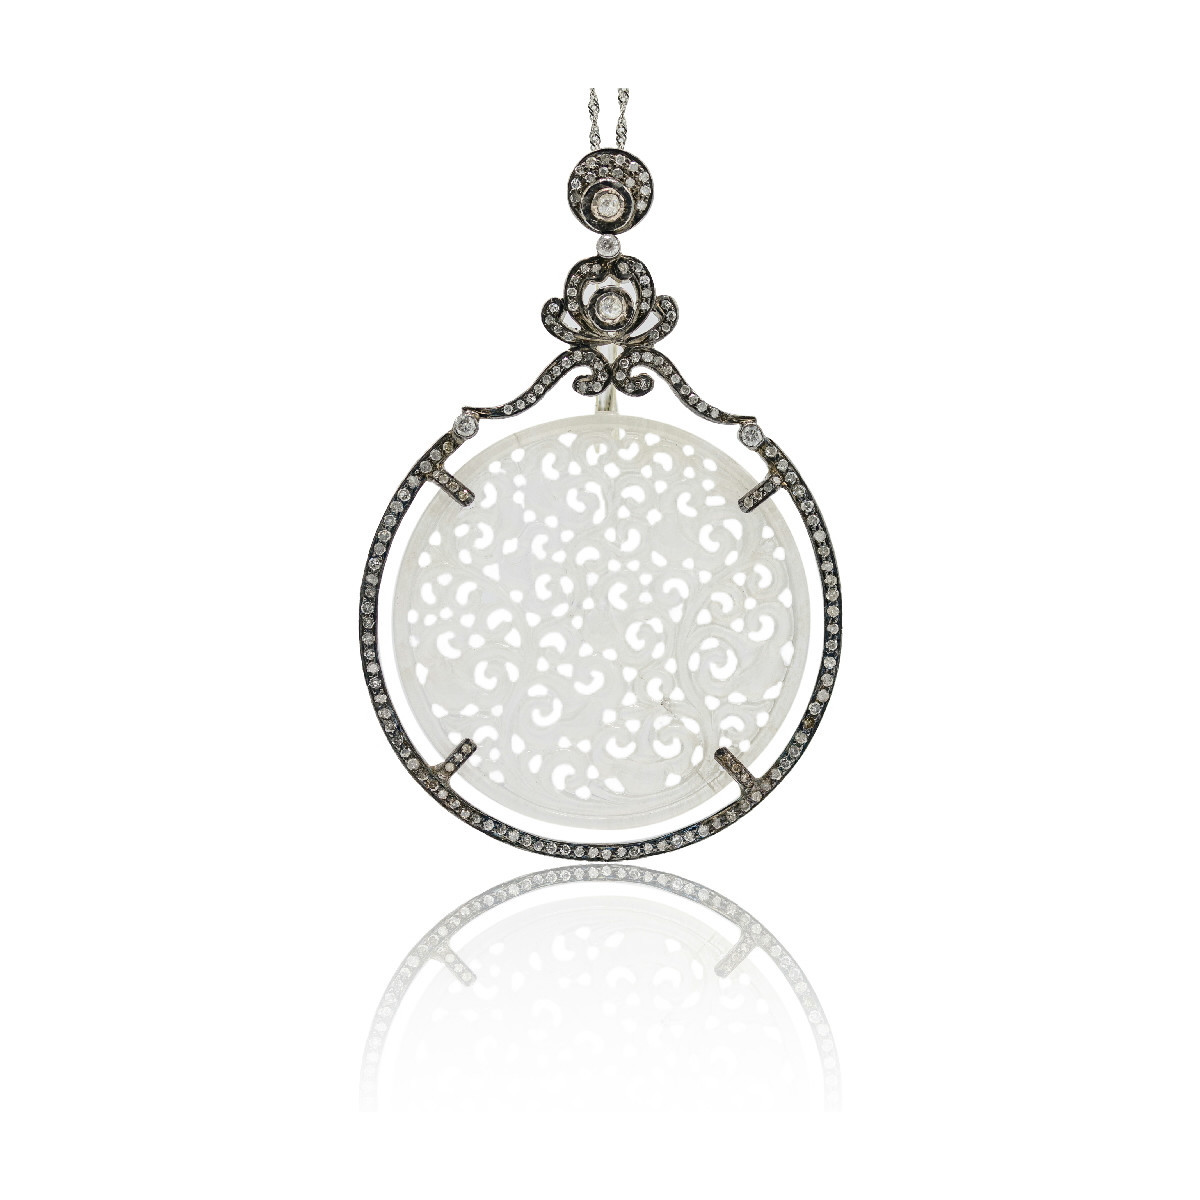 Gold and silver pendant with Jade